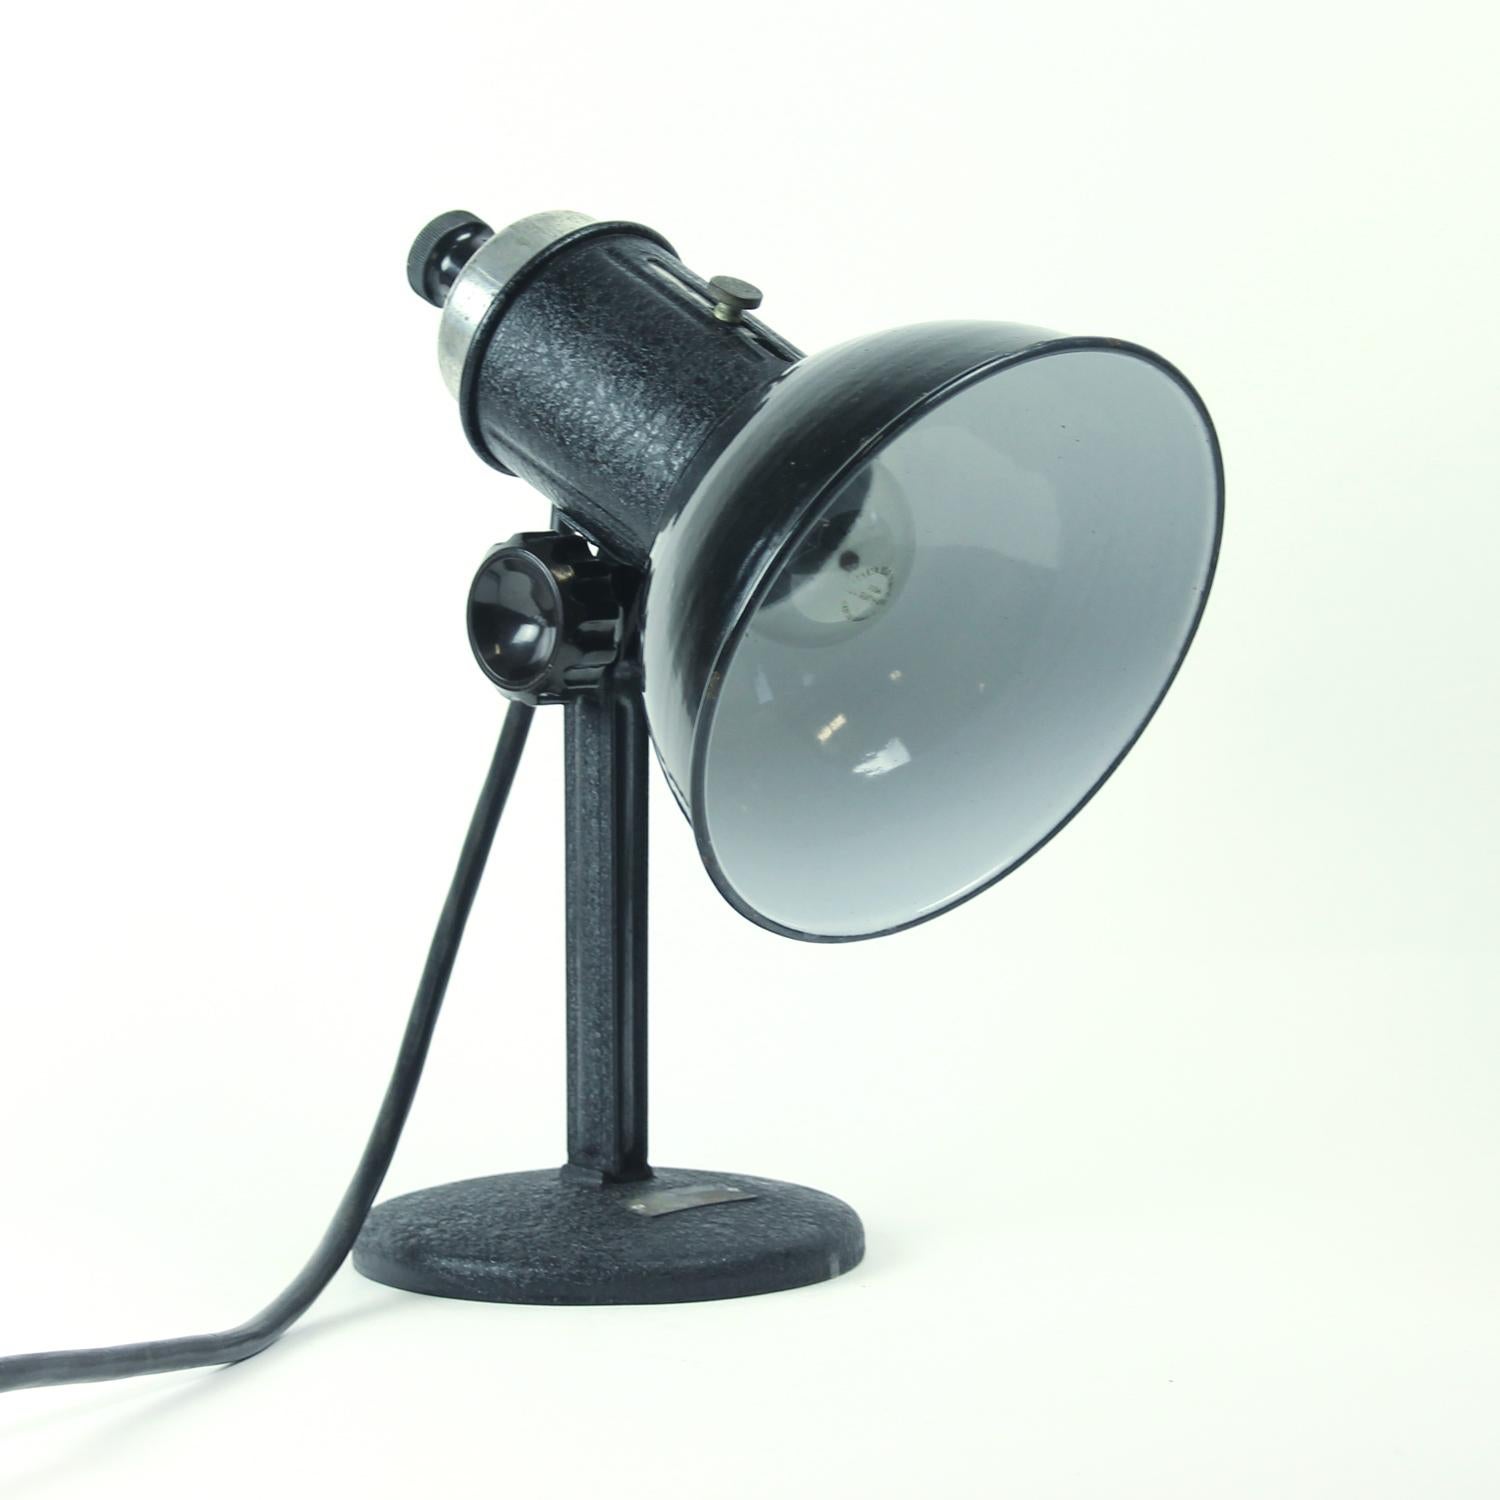 This interesting table lamp will always catch your eye. It is made of black metal, but the simple design makes it look very elegant. Made entirely of metal. Shield adjustable. In an excellent condition. Works on one bulb, European plug.